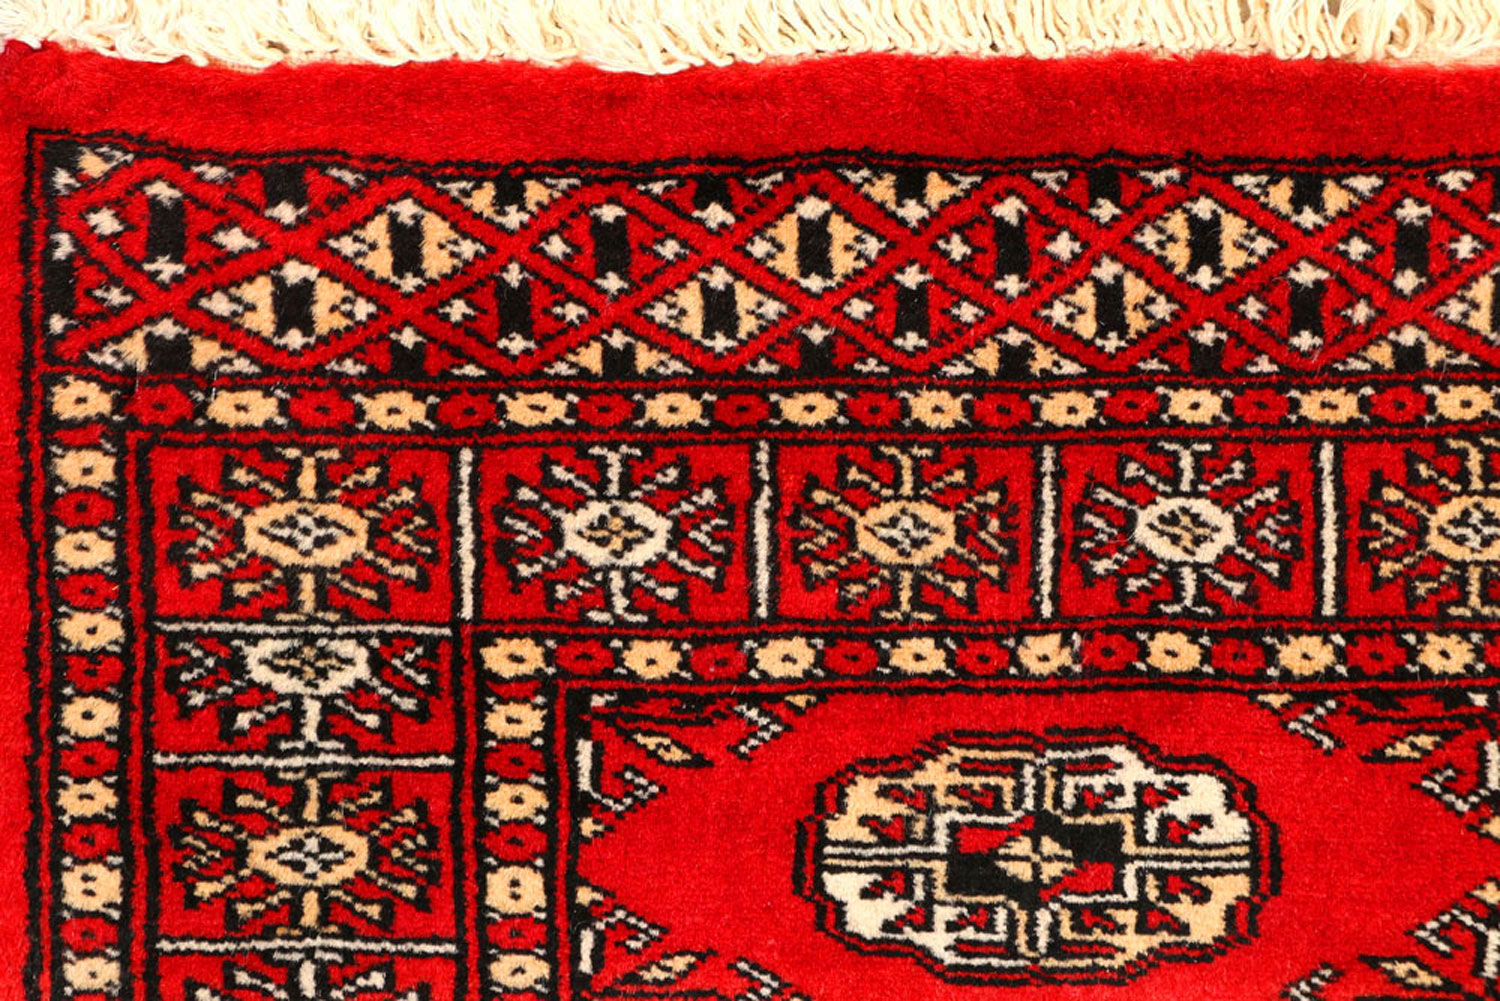 Cultural Rugs